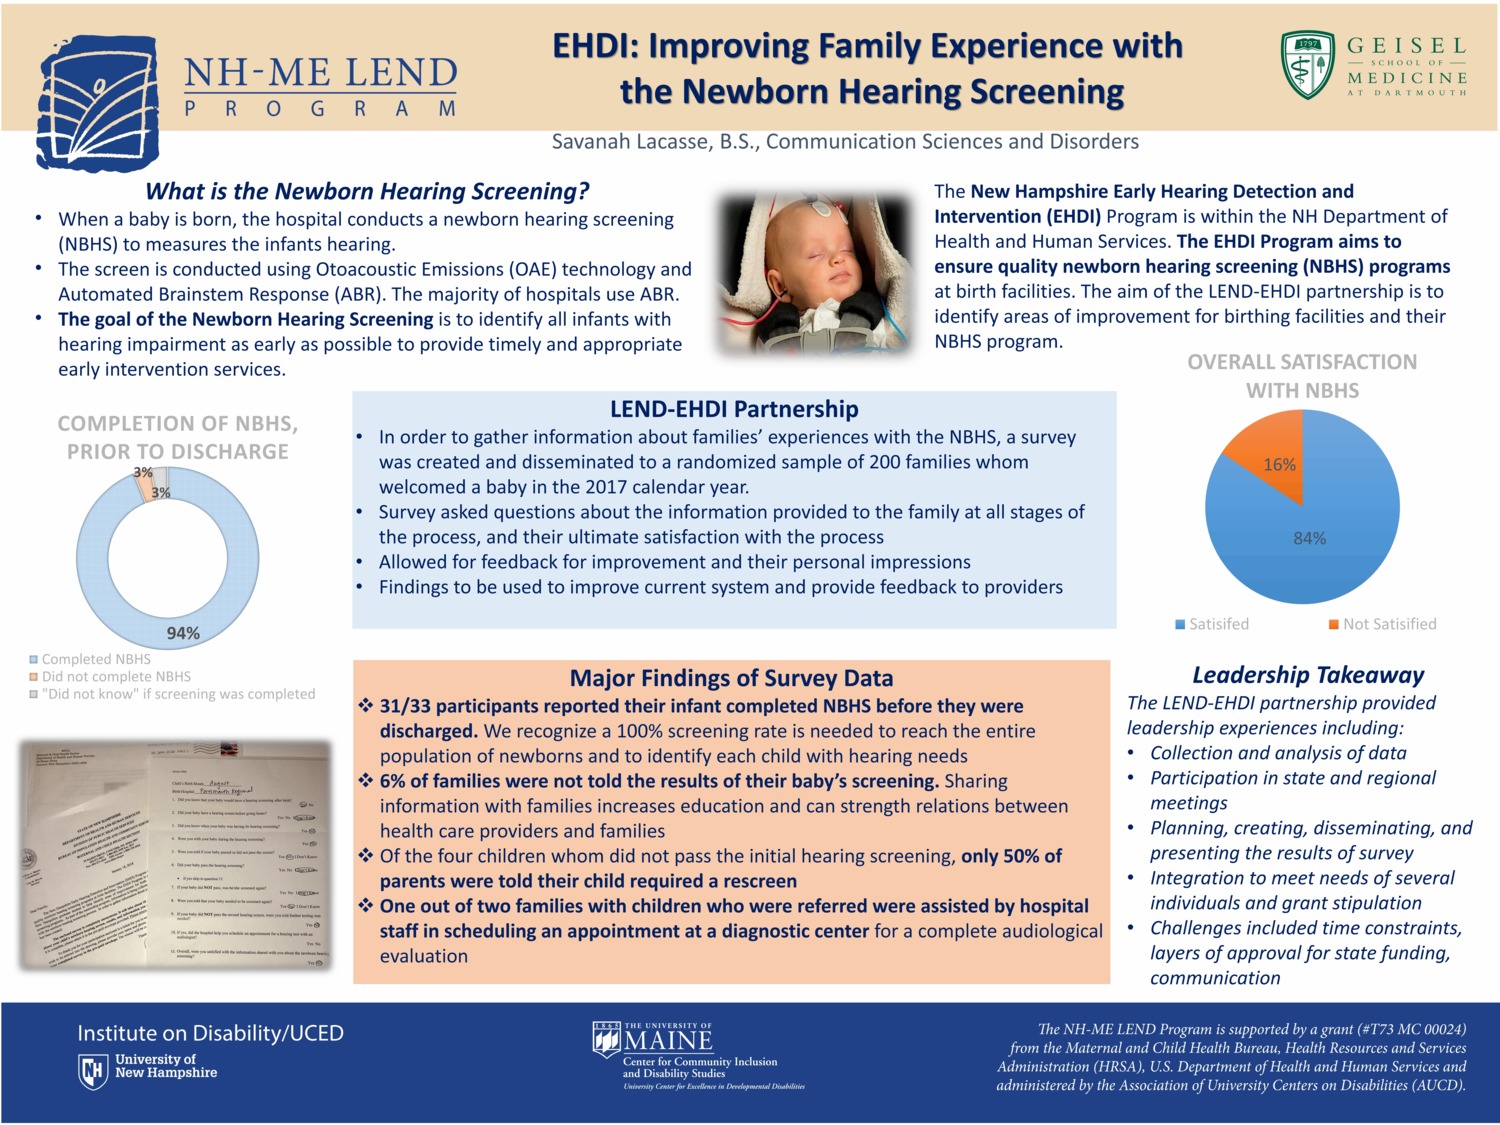 Ehdi: Improving Family Experience With The Newborn Hearing Screening by sba42